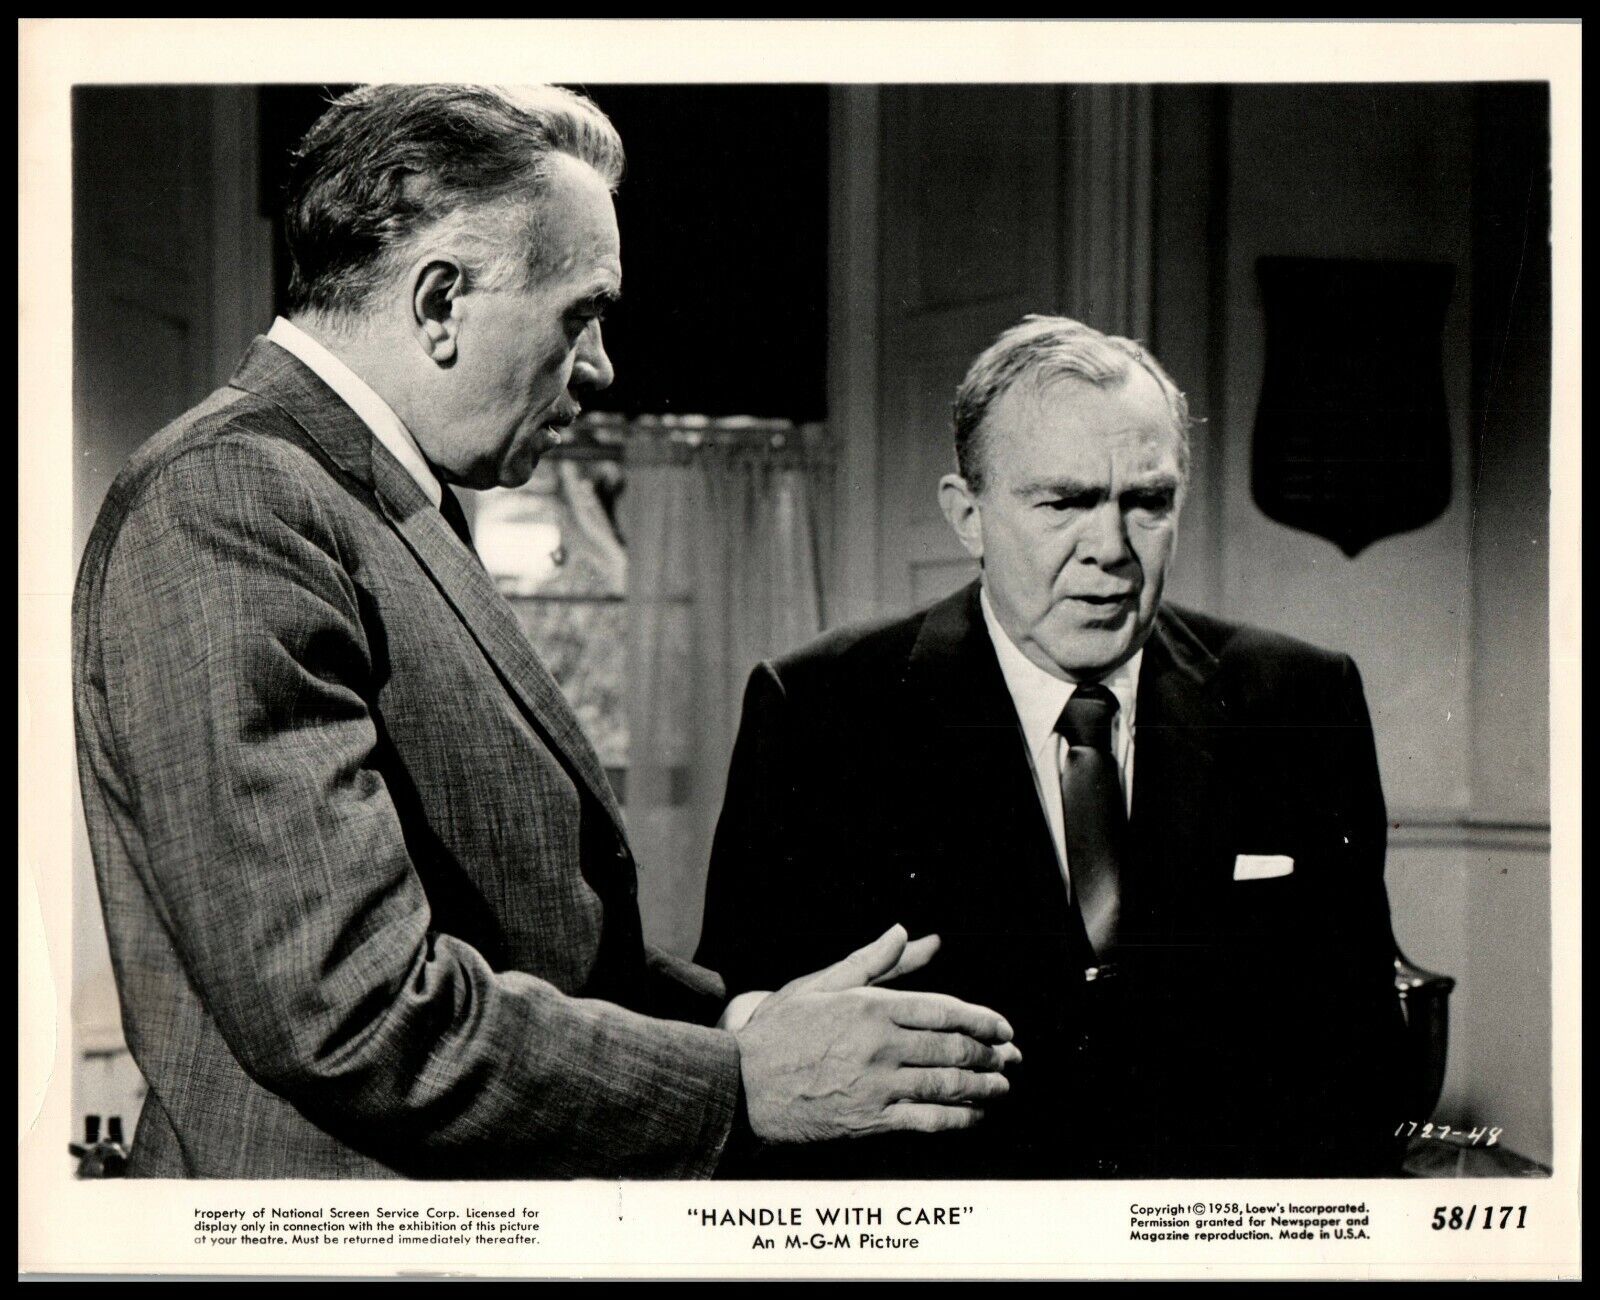 Thomas Mitchell + Walter Abel in Handle with Care (1958) ORIG VINTAGE PHOTO M 67